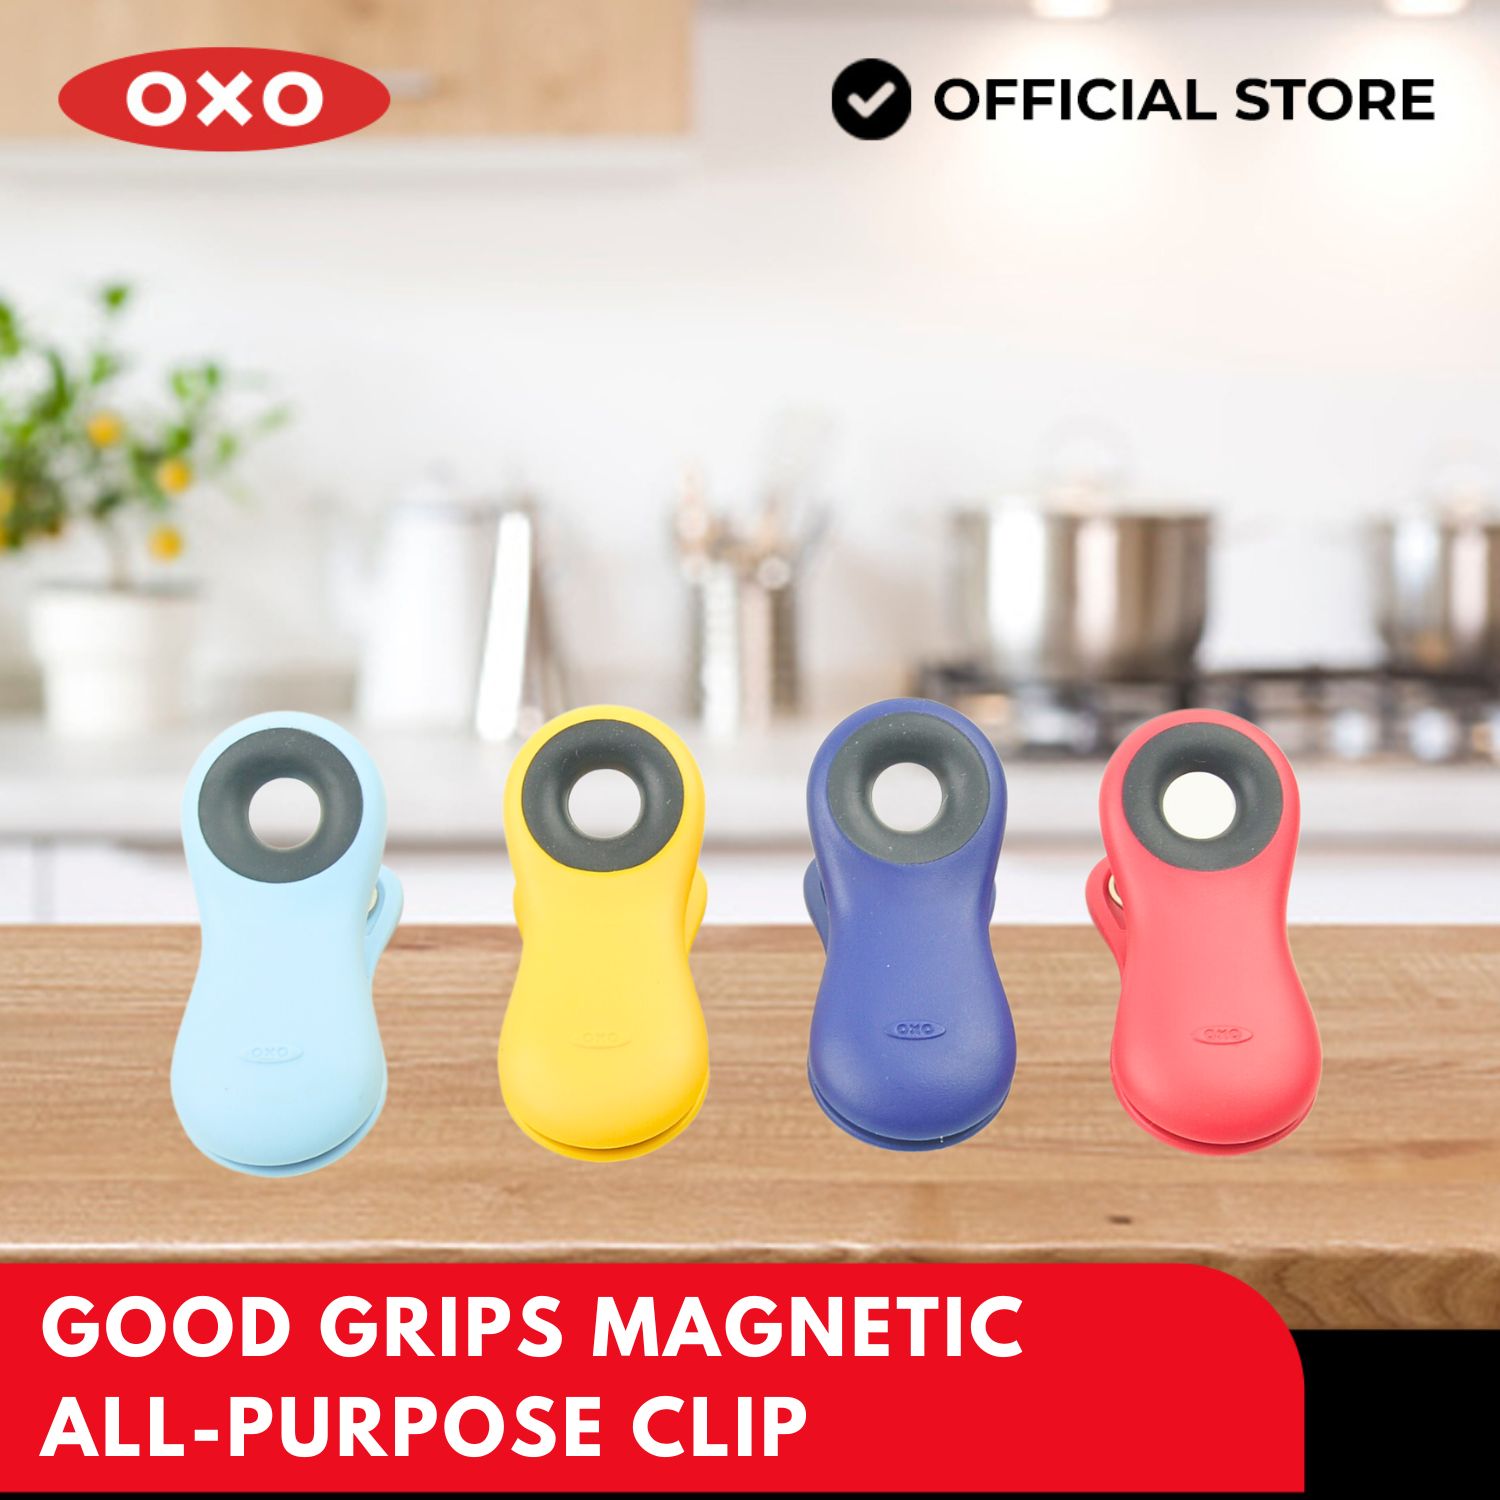 OXO Good Grips 2 Cup Angled Measure Cup — Las Cosas Kitchen Shoppe